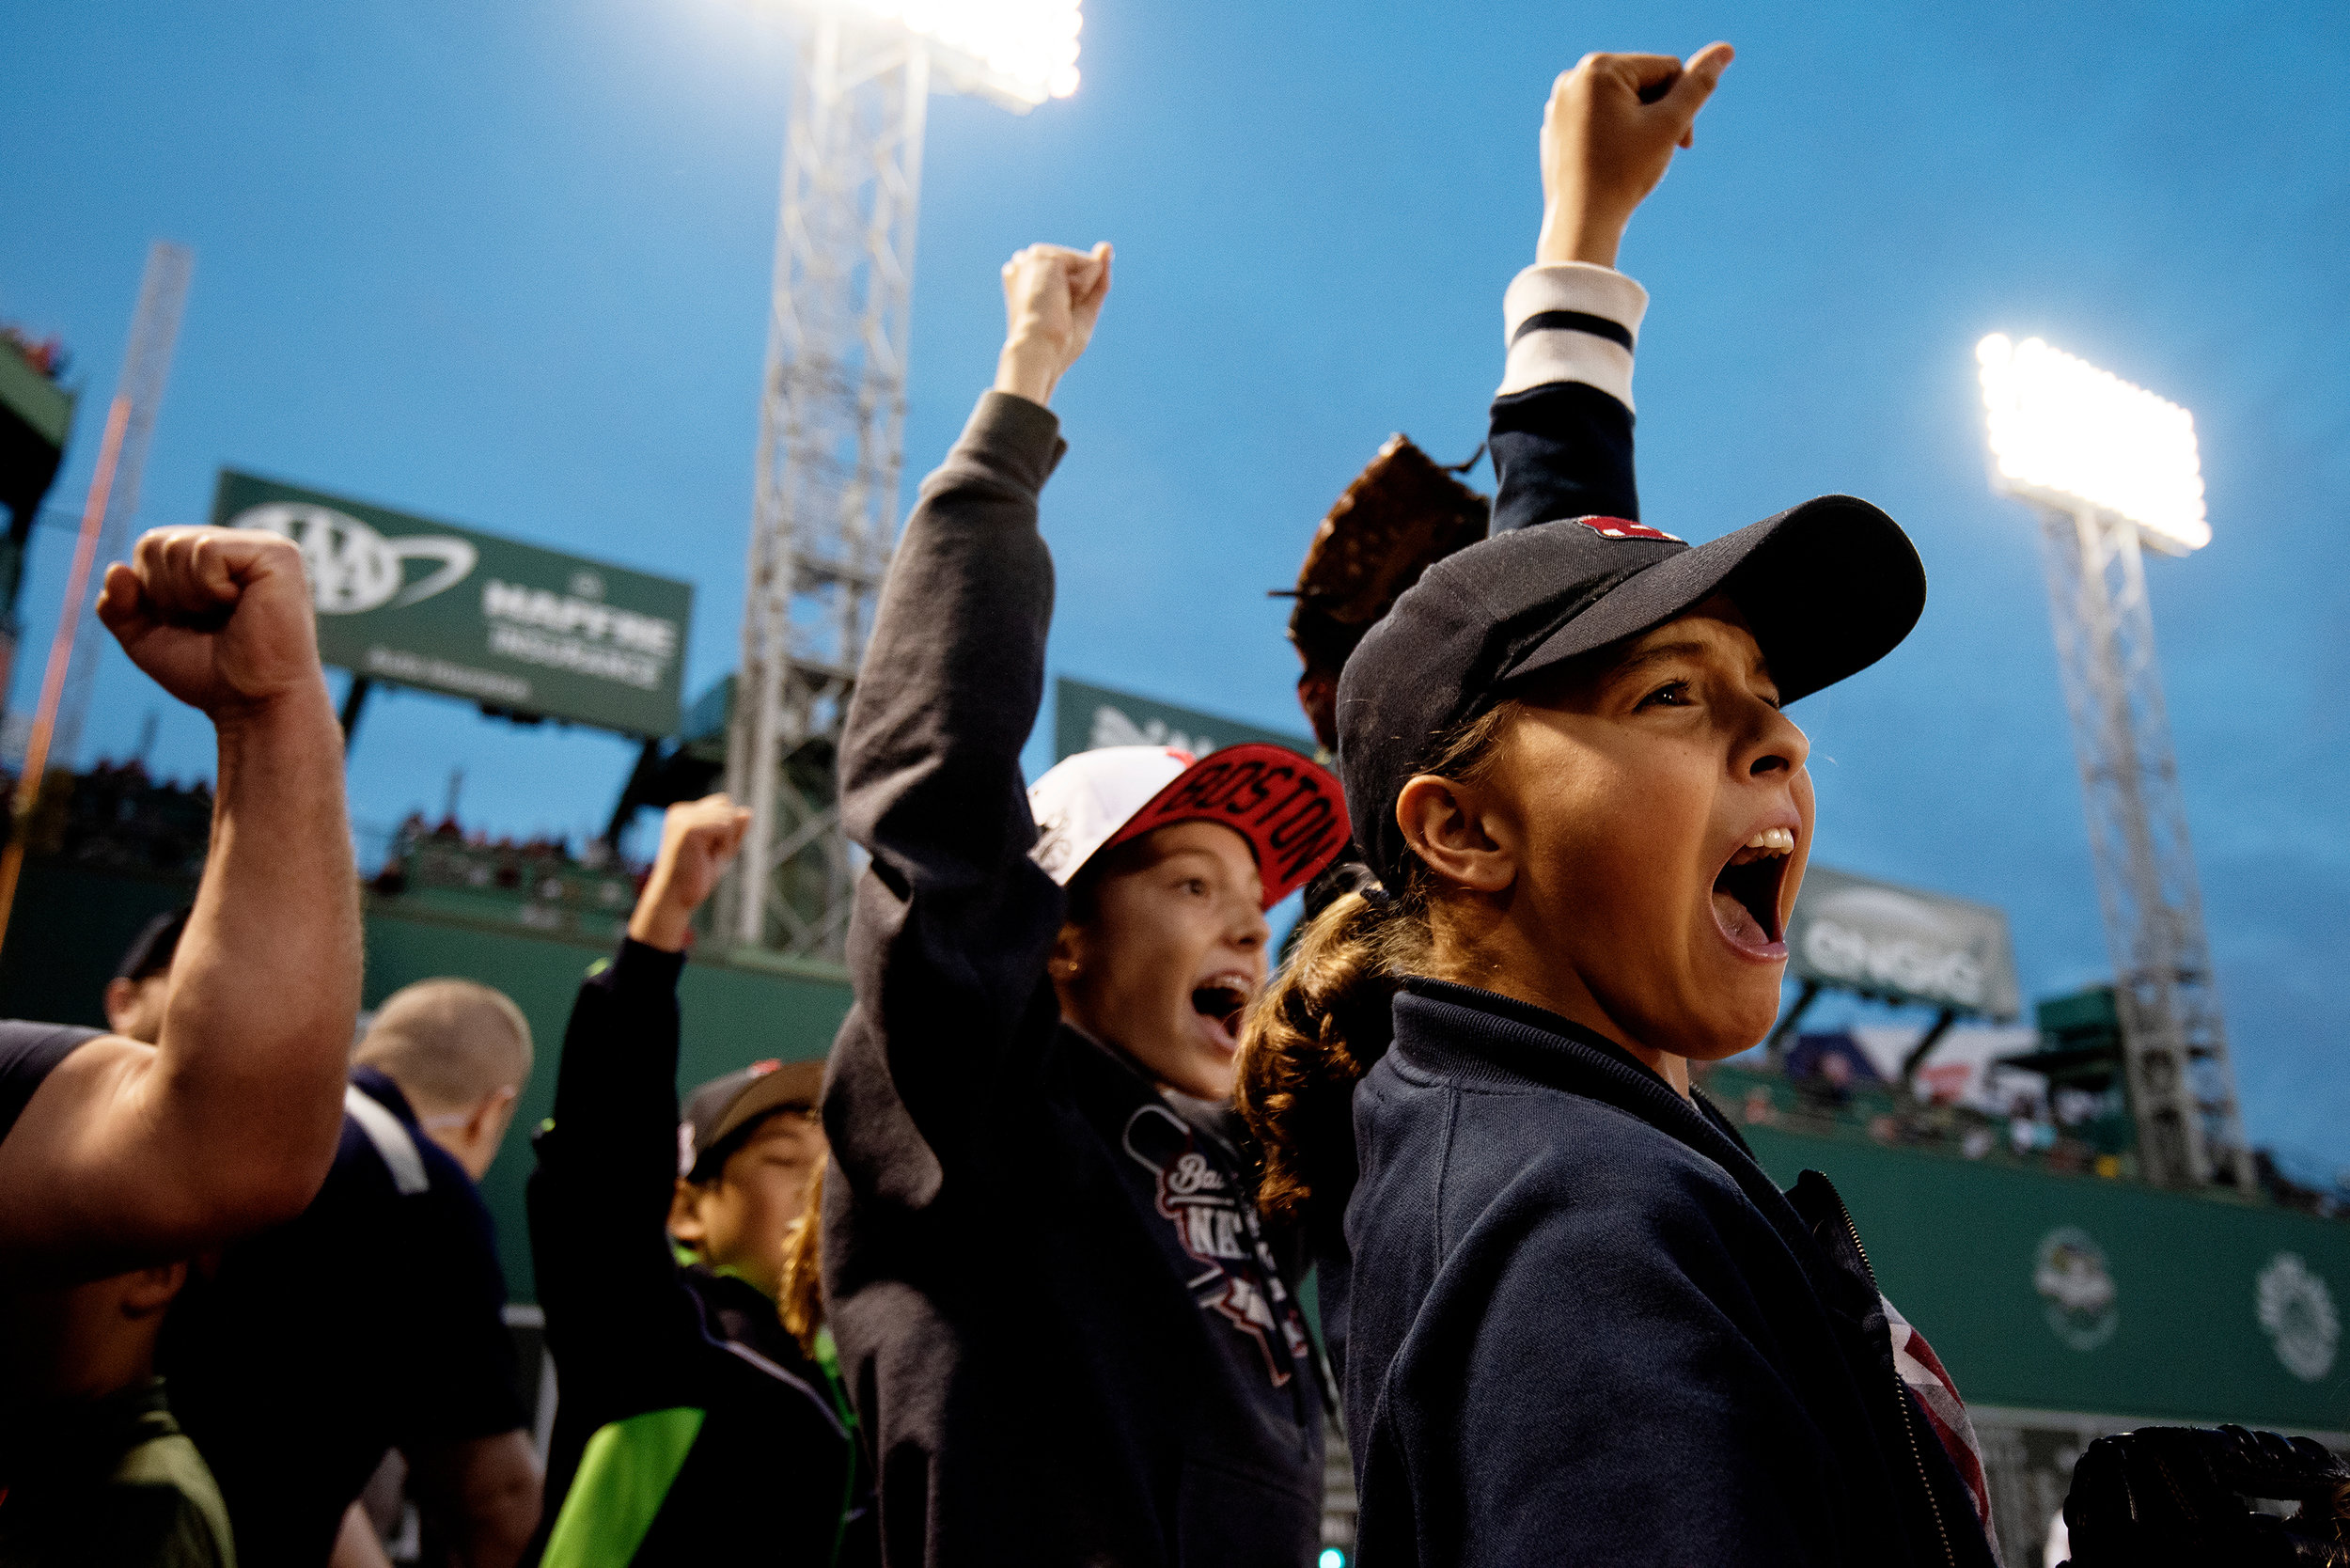  Fans react after the Red Sox's final win of the season over the New York Yankees at Fenway Park in Boston, Massachusetts, on Sunday, September 30, 2018. 